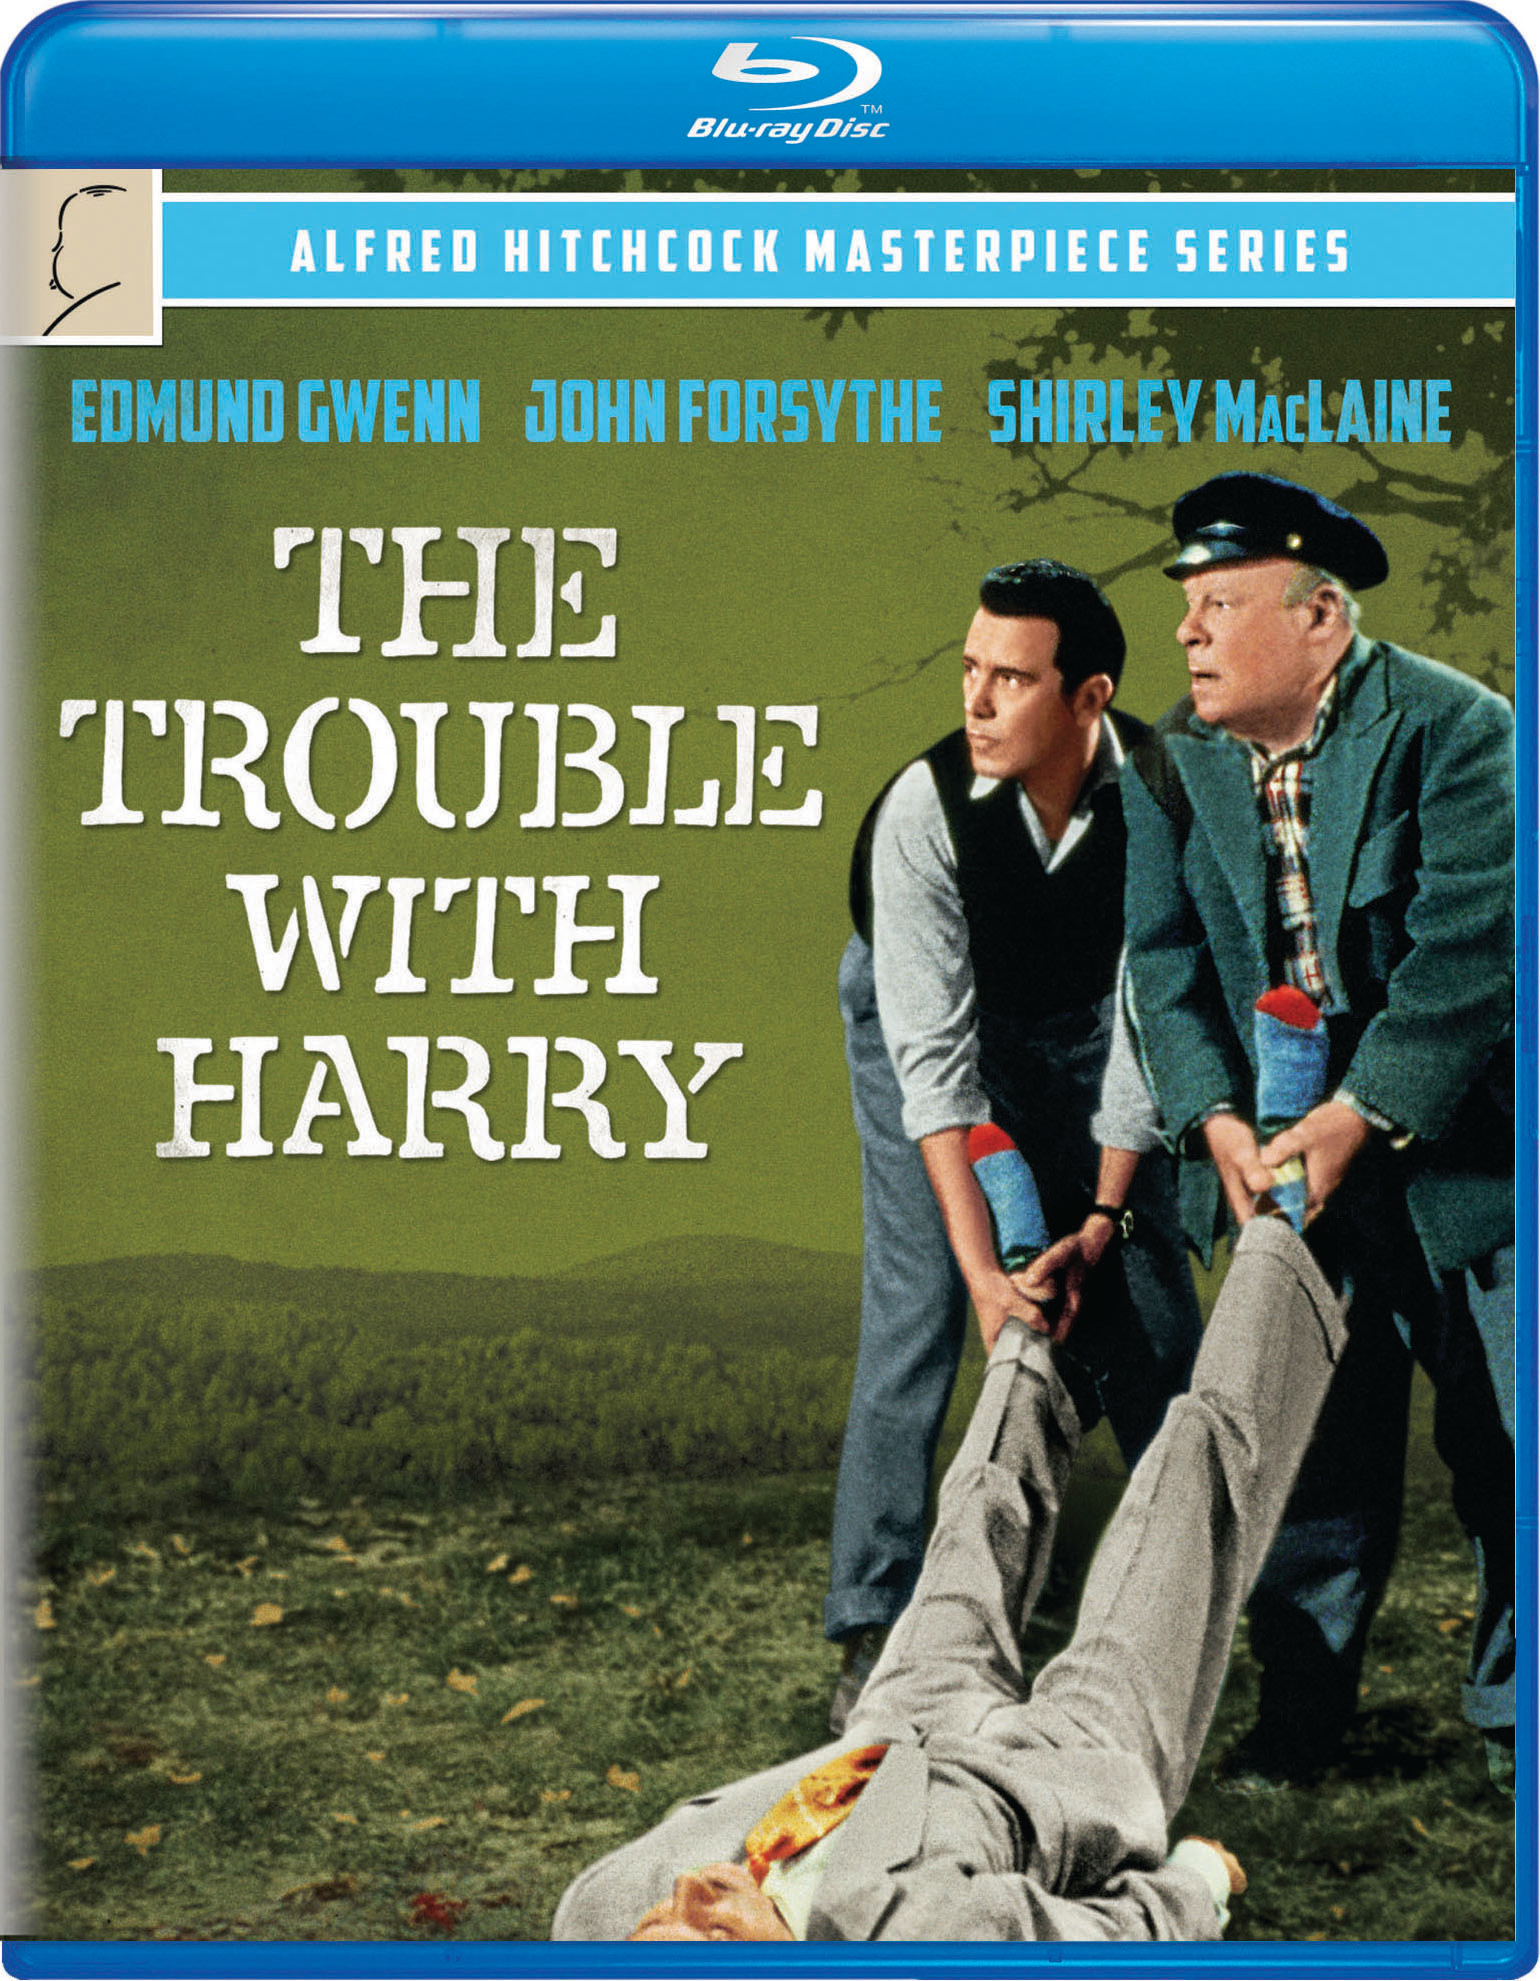 The Trouble With Harry - Blu-ray [ 1955 ]  - Modern Classic Movies On Blu-ray - Movies On GRUV